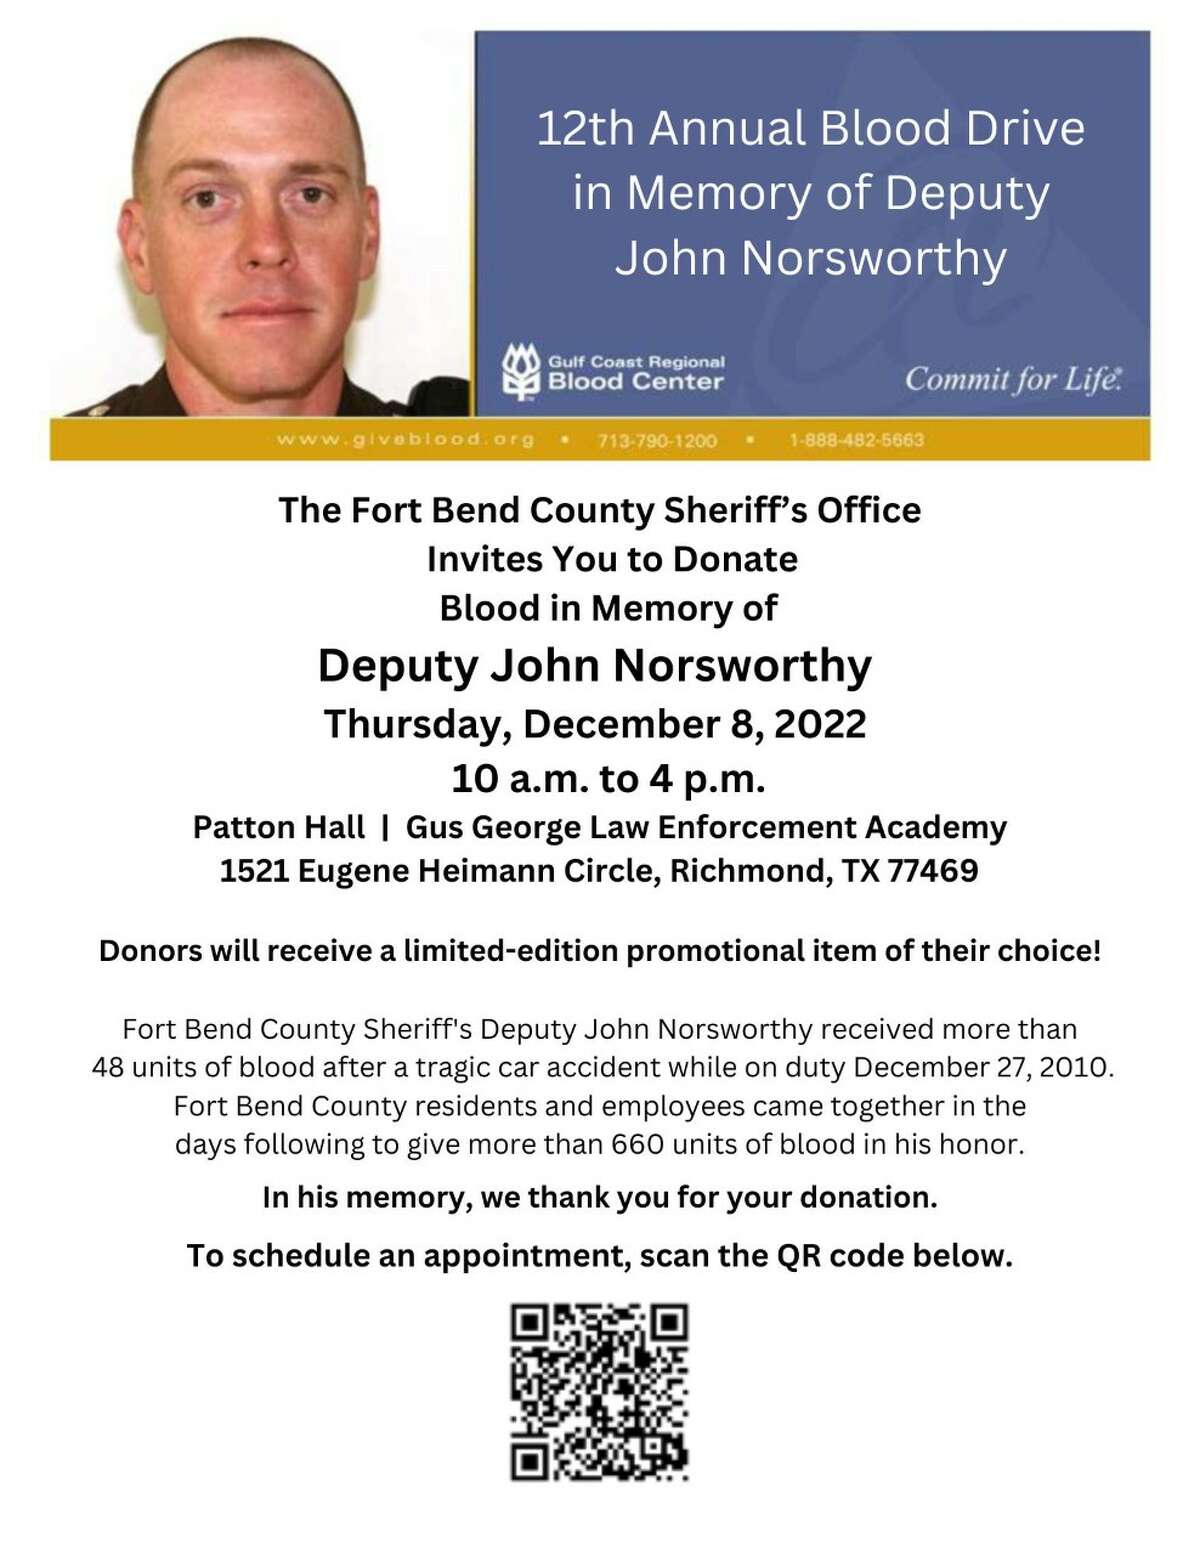 The Fort Bend County Sheriff's Office and the Gulf Coast Regional Blood Center on Dec. 8 will host the 12th annual blood drive in memory of Deputy John Norsworthy, who was killed in a car accident in 2010.